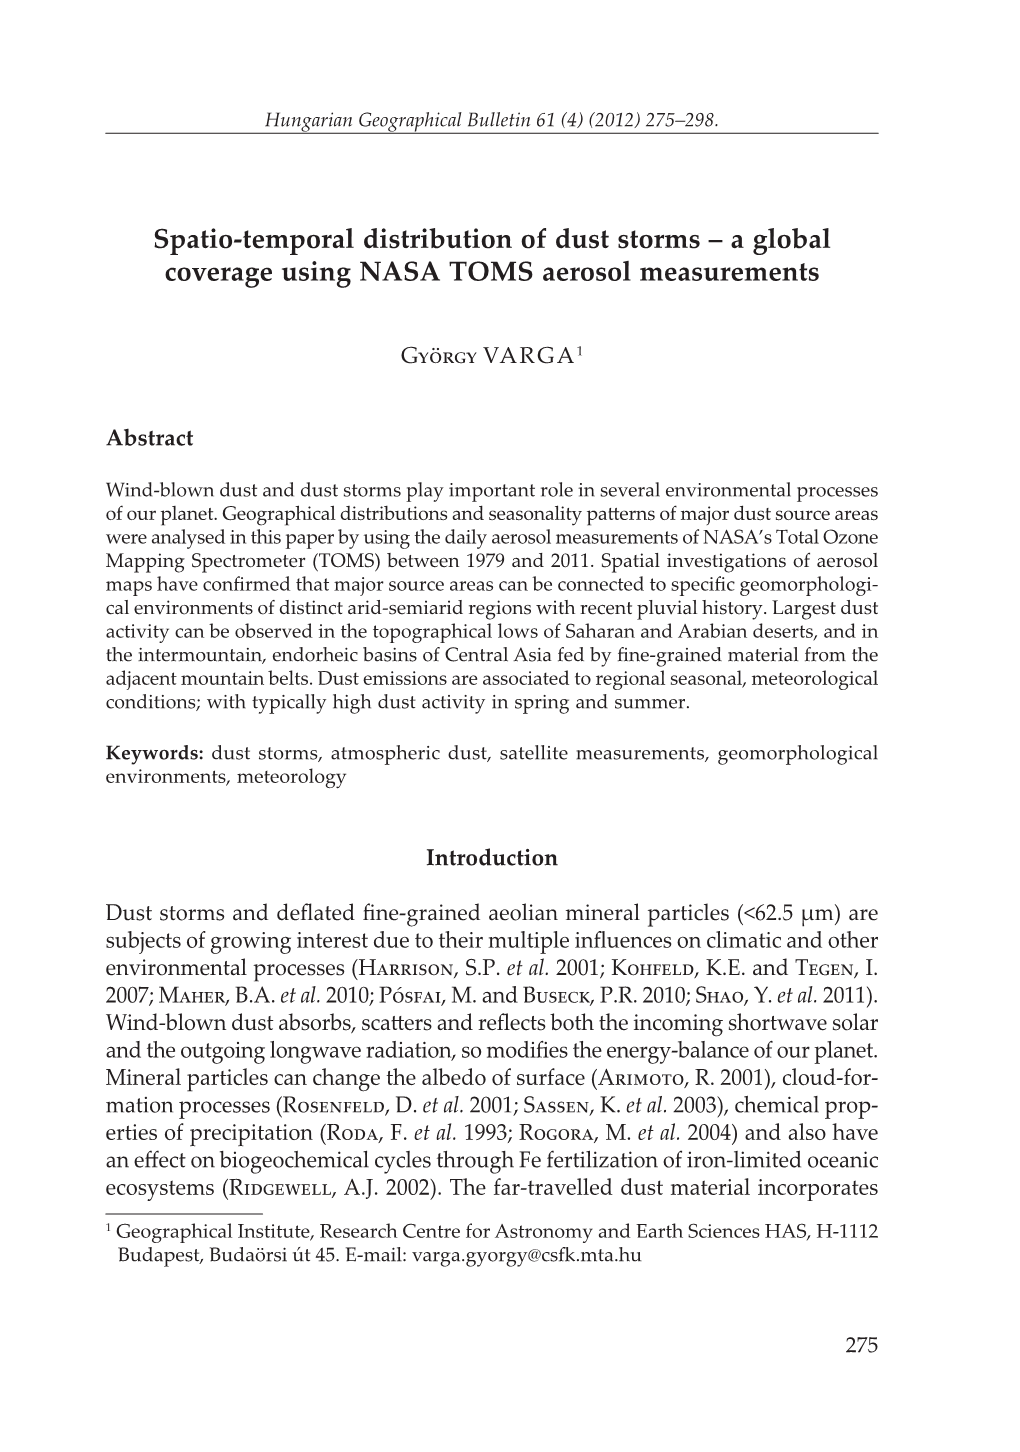 Spatio-Temporal Distribution of Dust Storms – a Global Coverage Using NASA TOMS Areosol Measurements